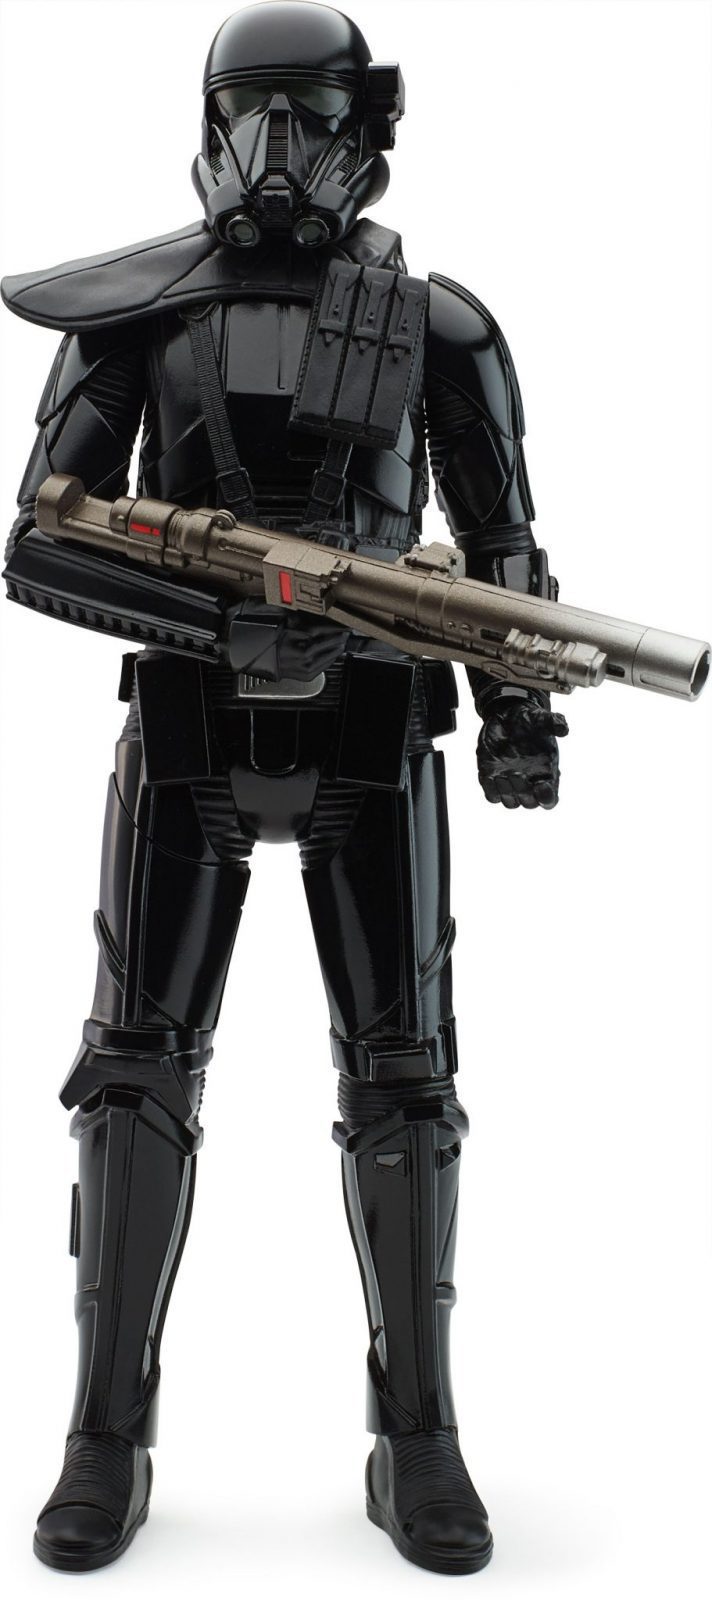 IMPERIAL DEATH TROOPER 12 INCH ELECTRONIC DUEL FIGURE (1)